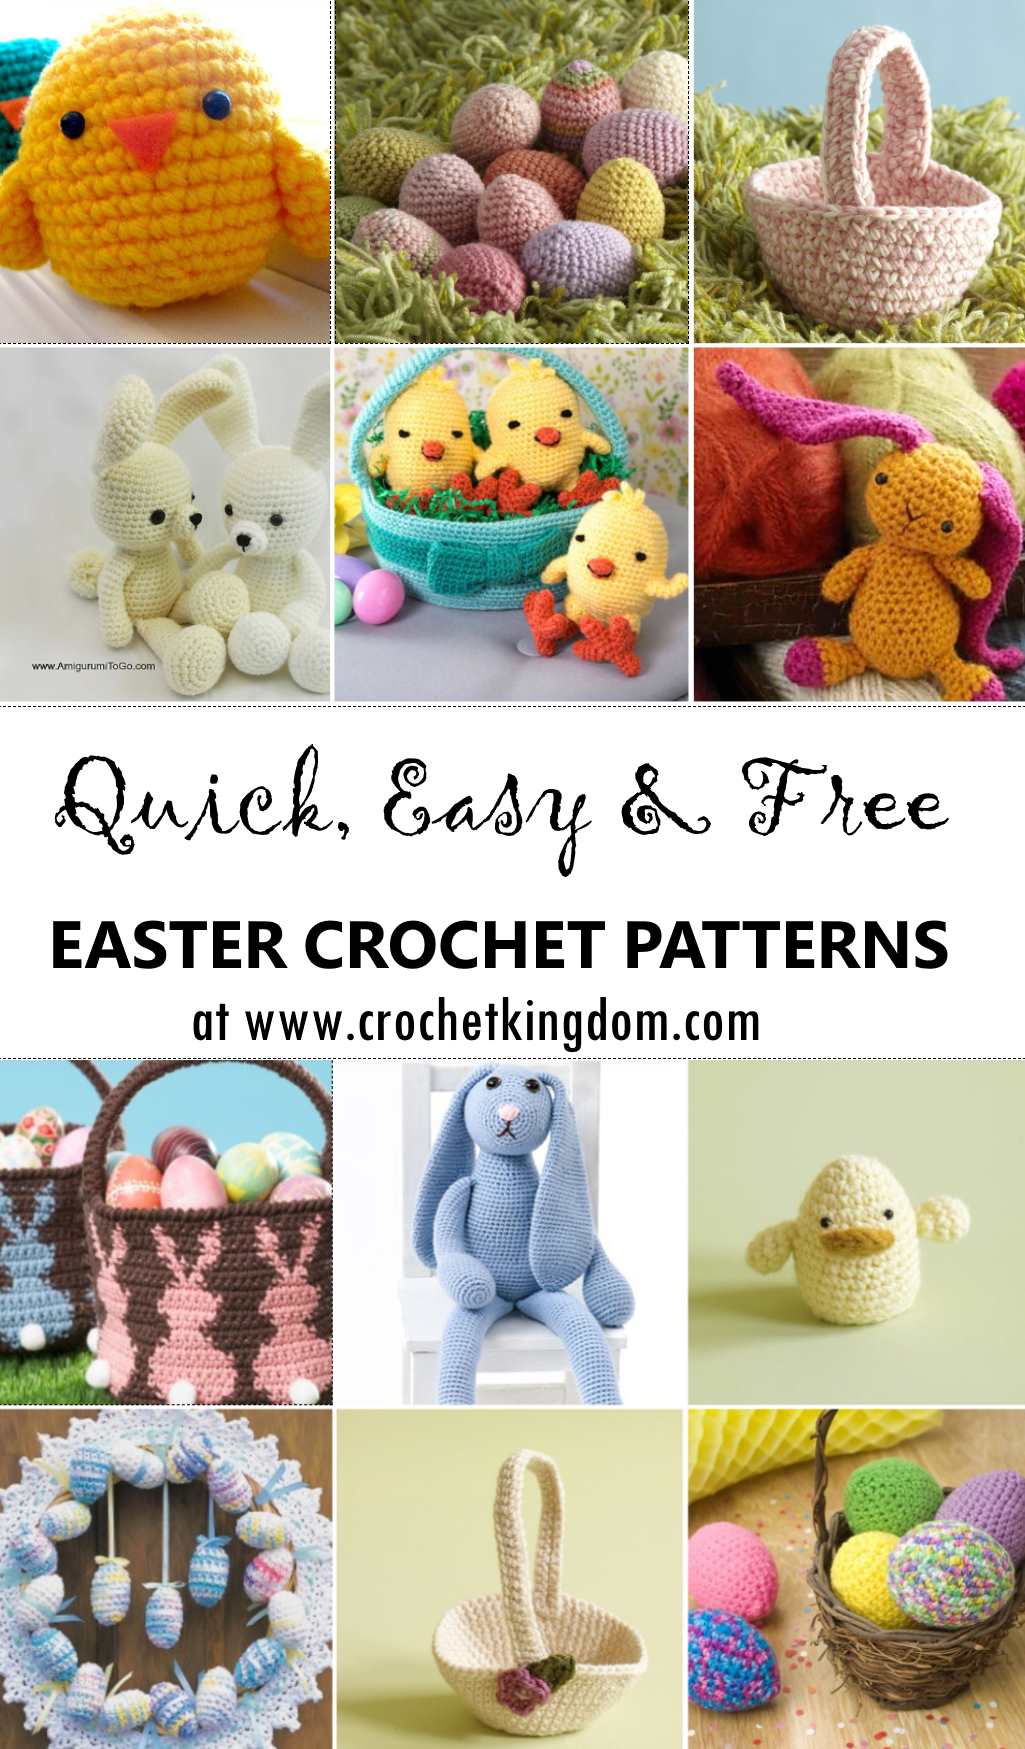 Many Easter Crochet Patterns that are Quick, Easy and Free. Just Free Easter Patterns to Crochet.